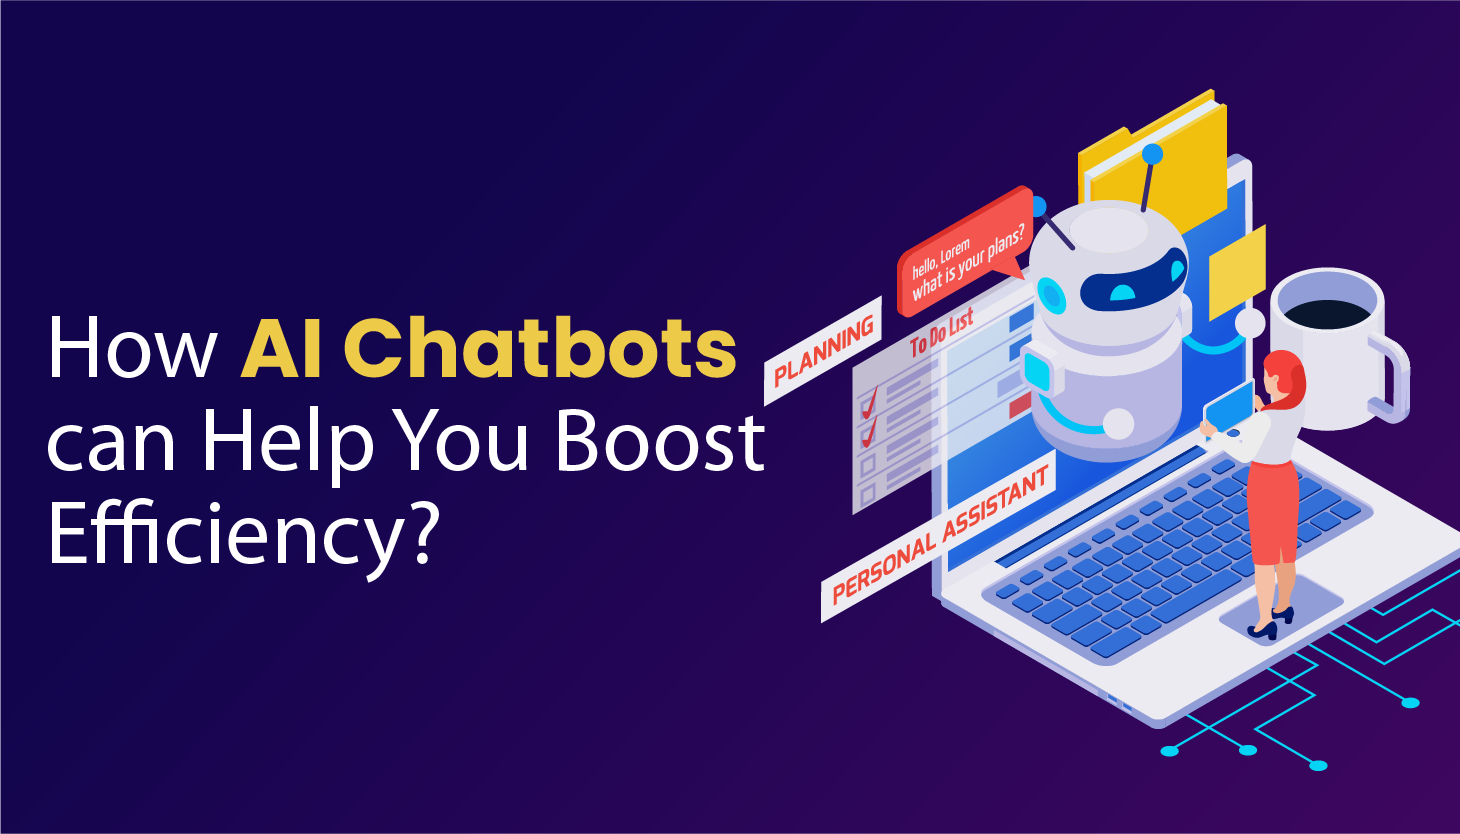  How AI Chatbots can Help You Boost Efficiency?